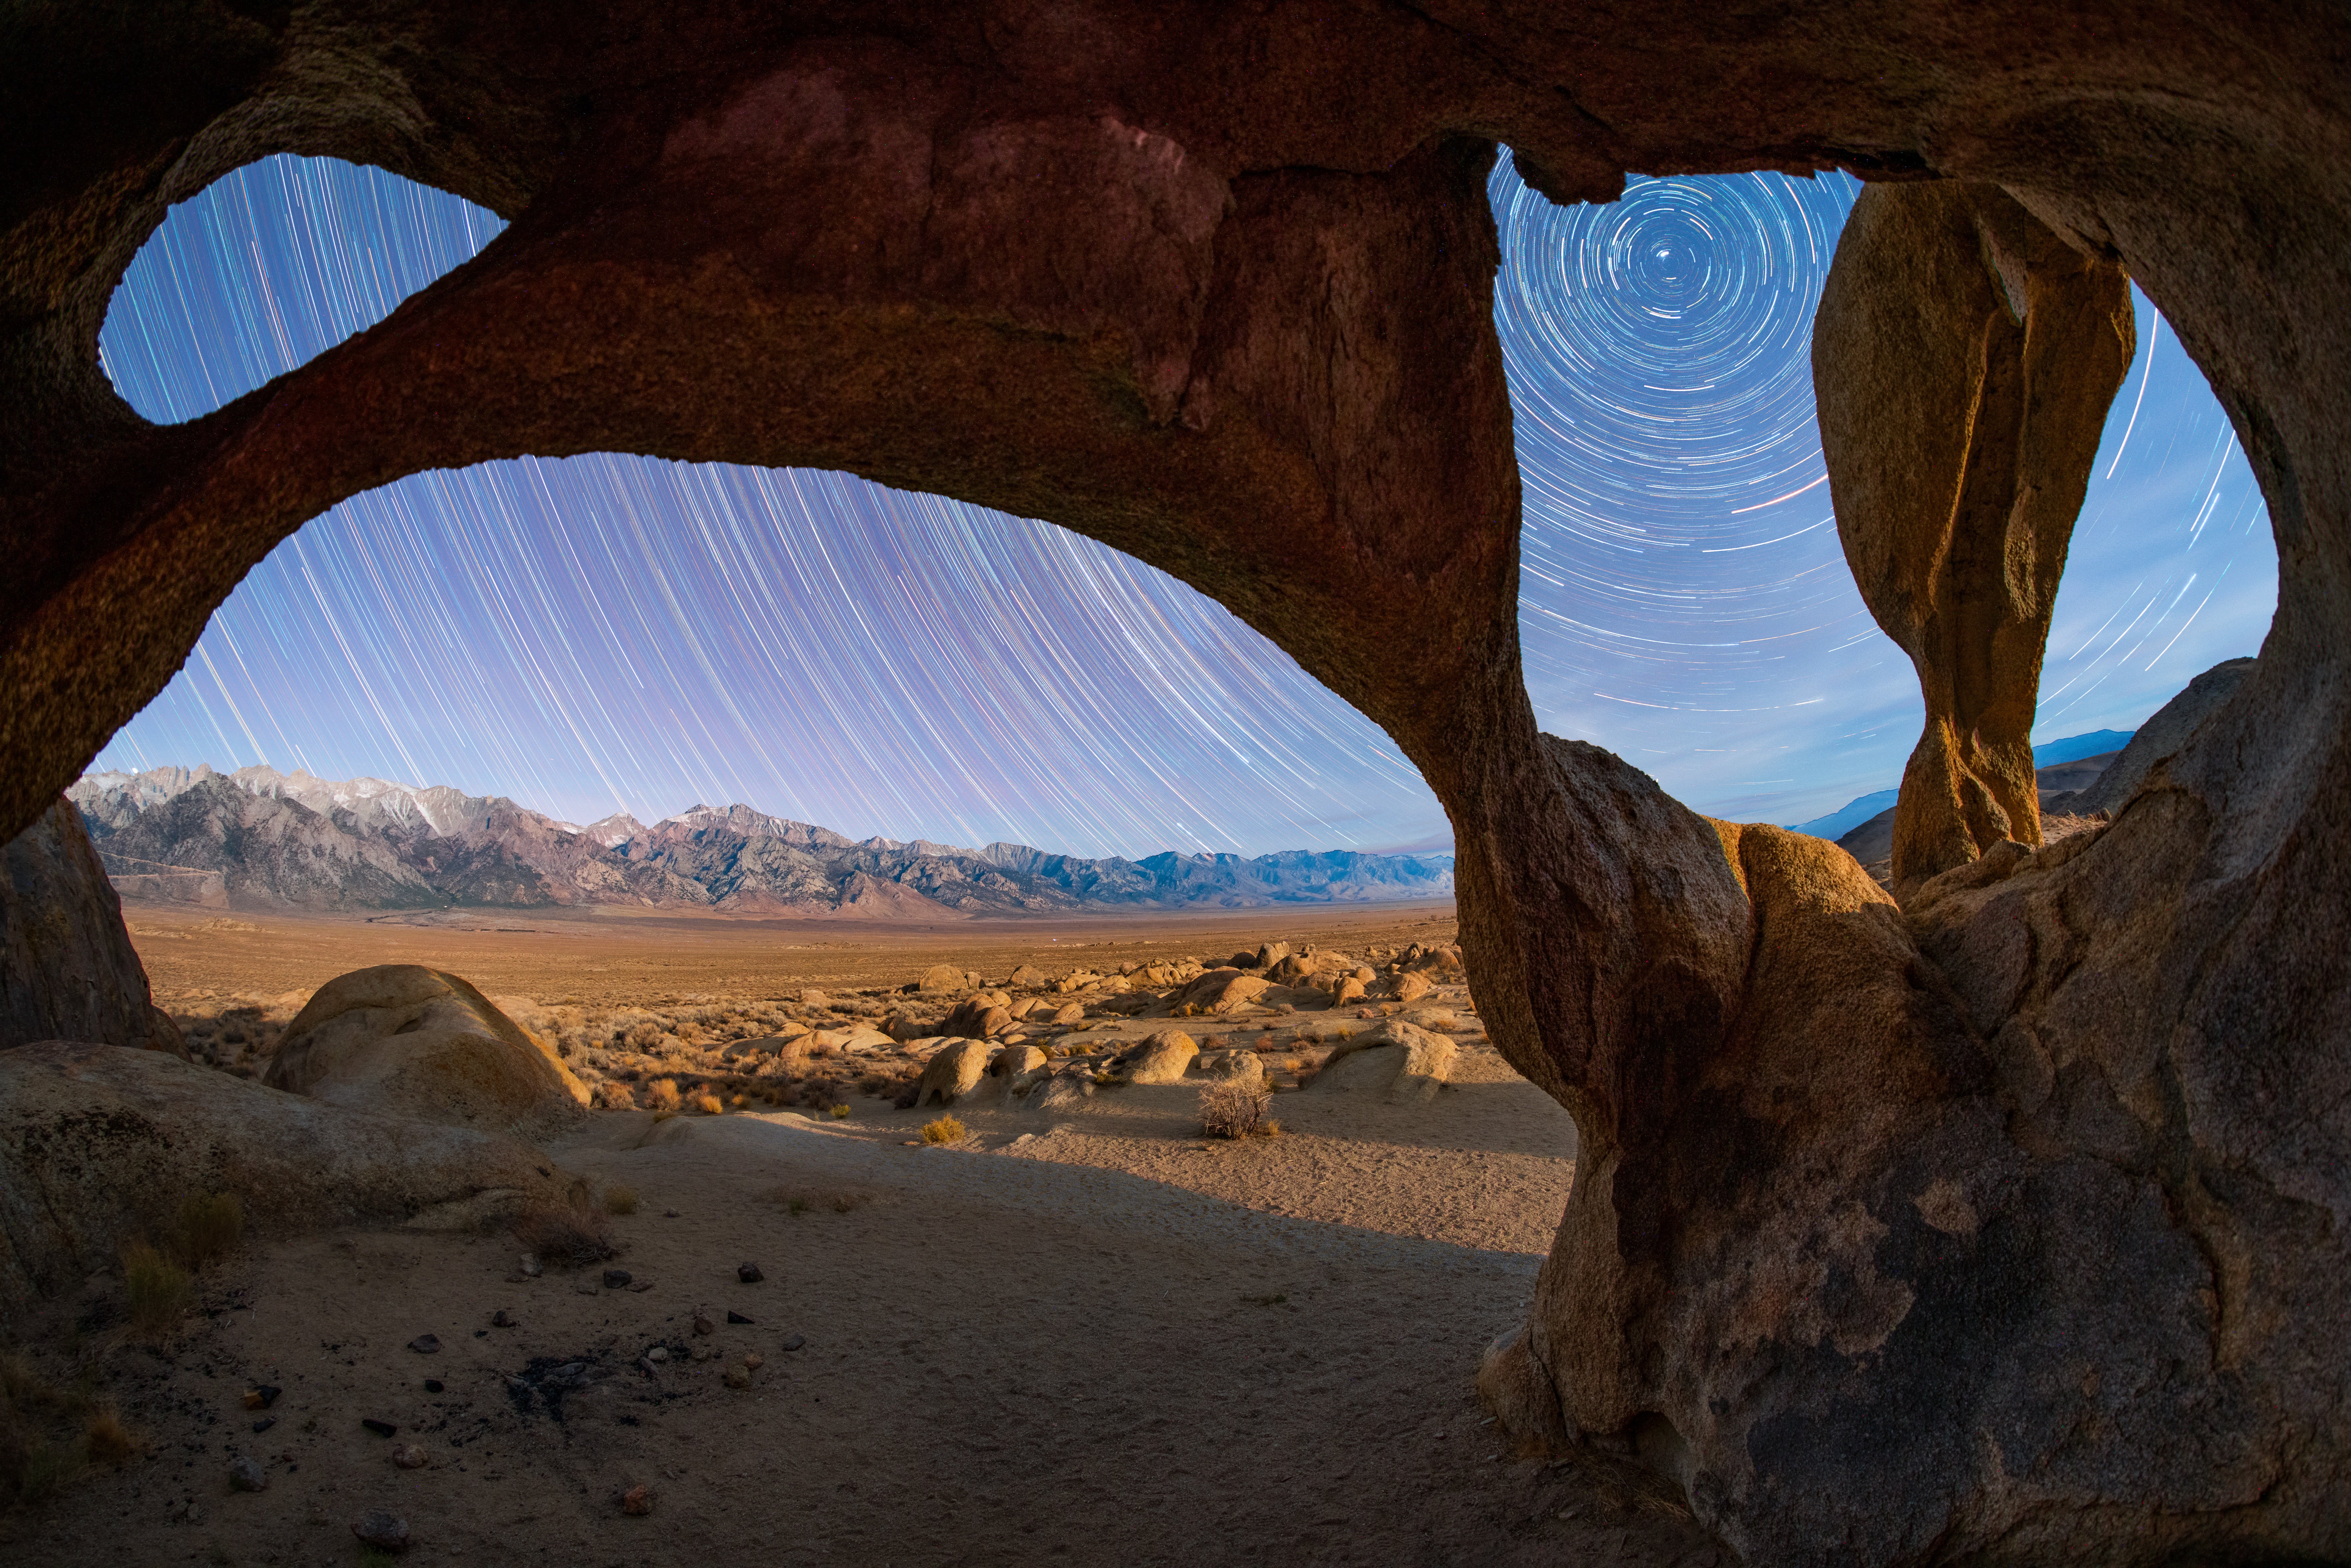 A swirl of stars outside a stone structure in the California desert. (Image: © Sean Goebel)